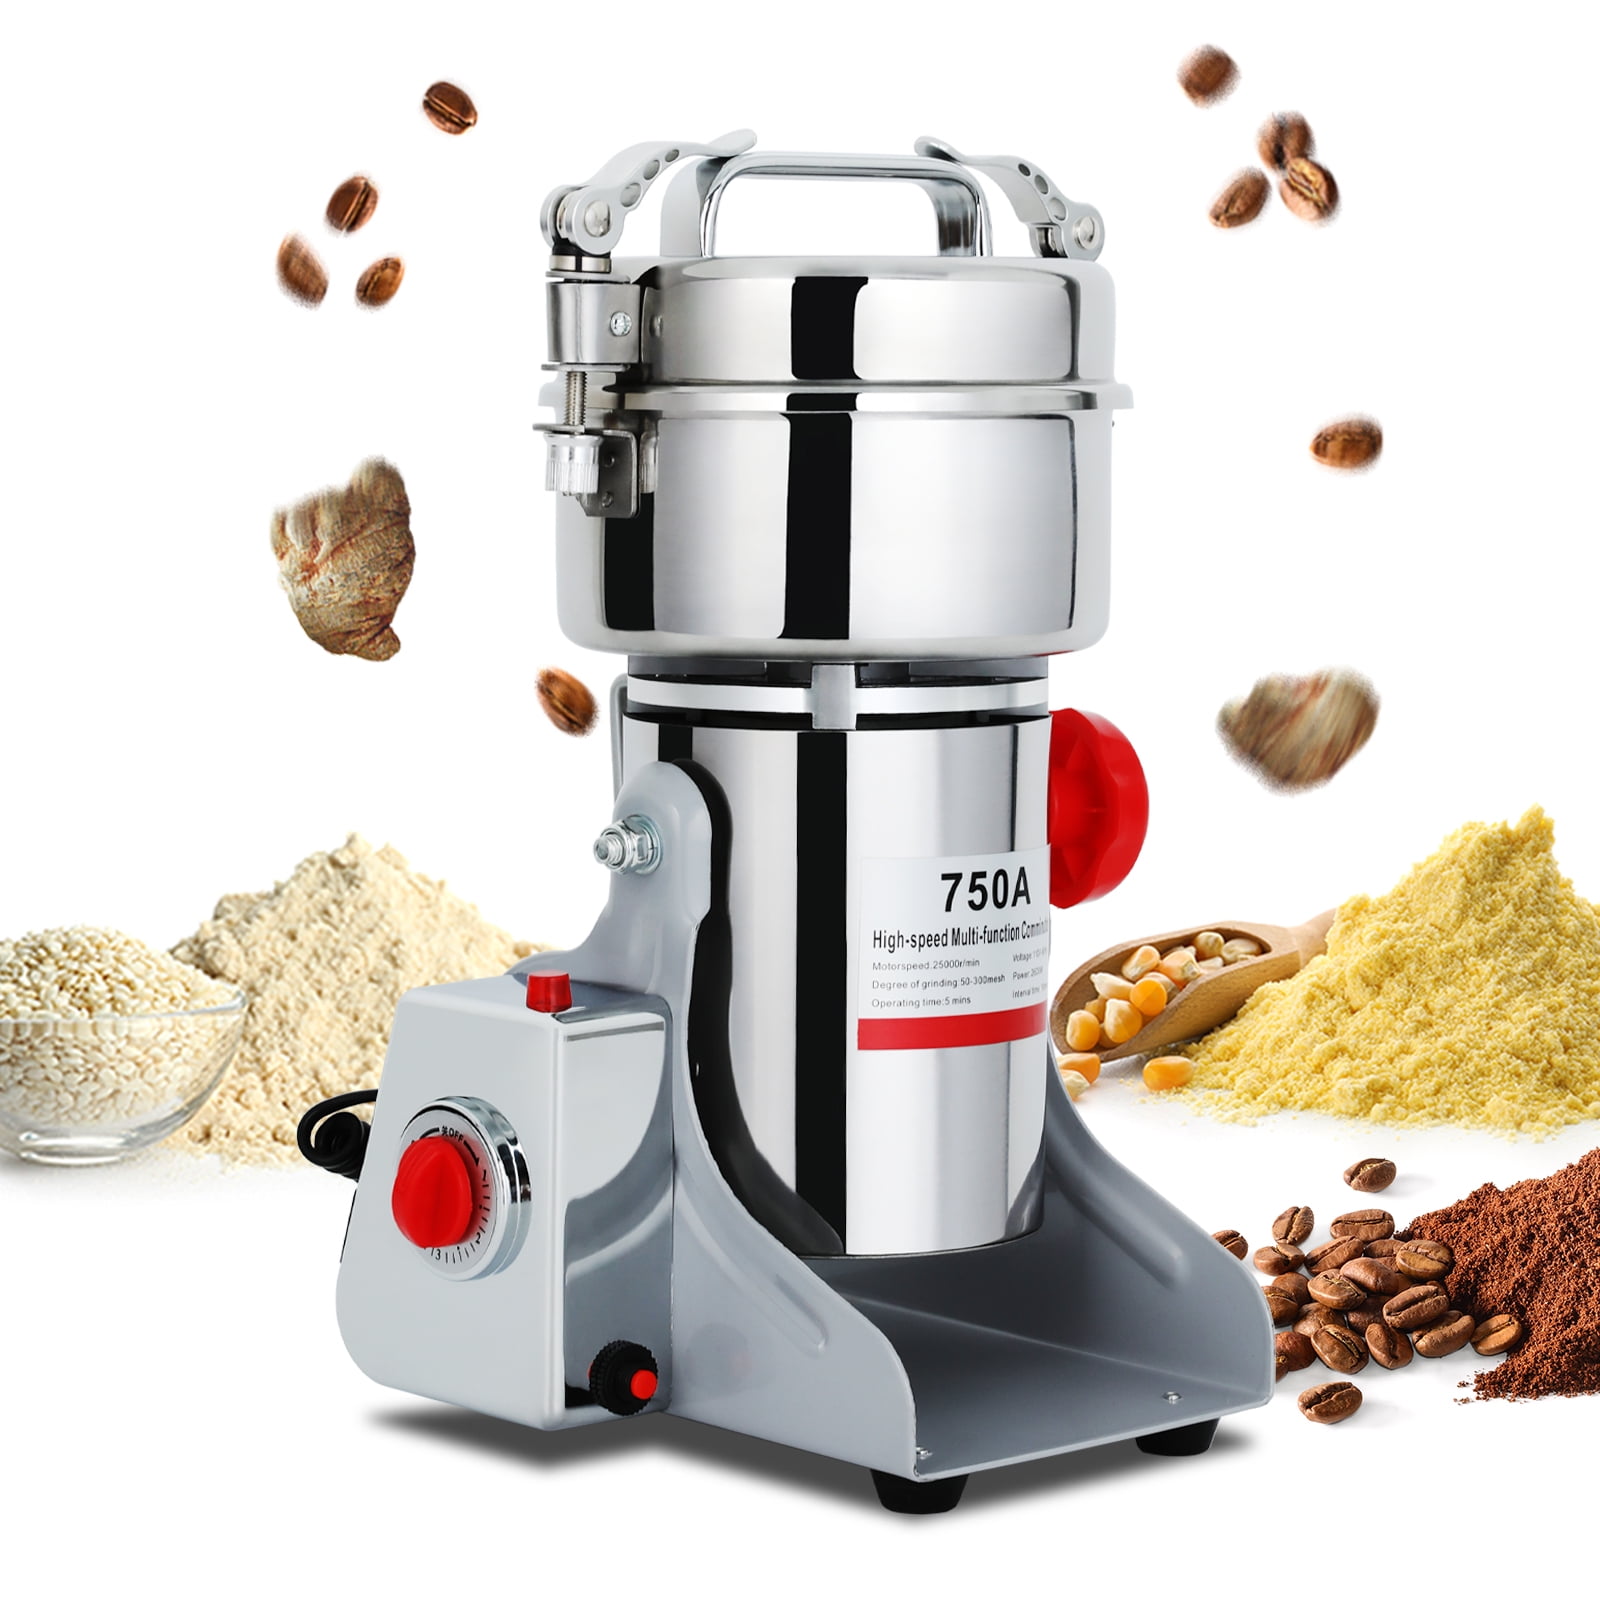 1000g/2000g/2500g Grains Spices Herbal Cereals Coffee Dry Food Grinder Mill Grinding  Machine gristmill Home flour powder crusher - AliExpress